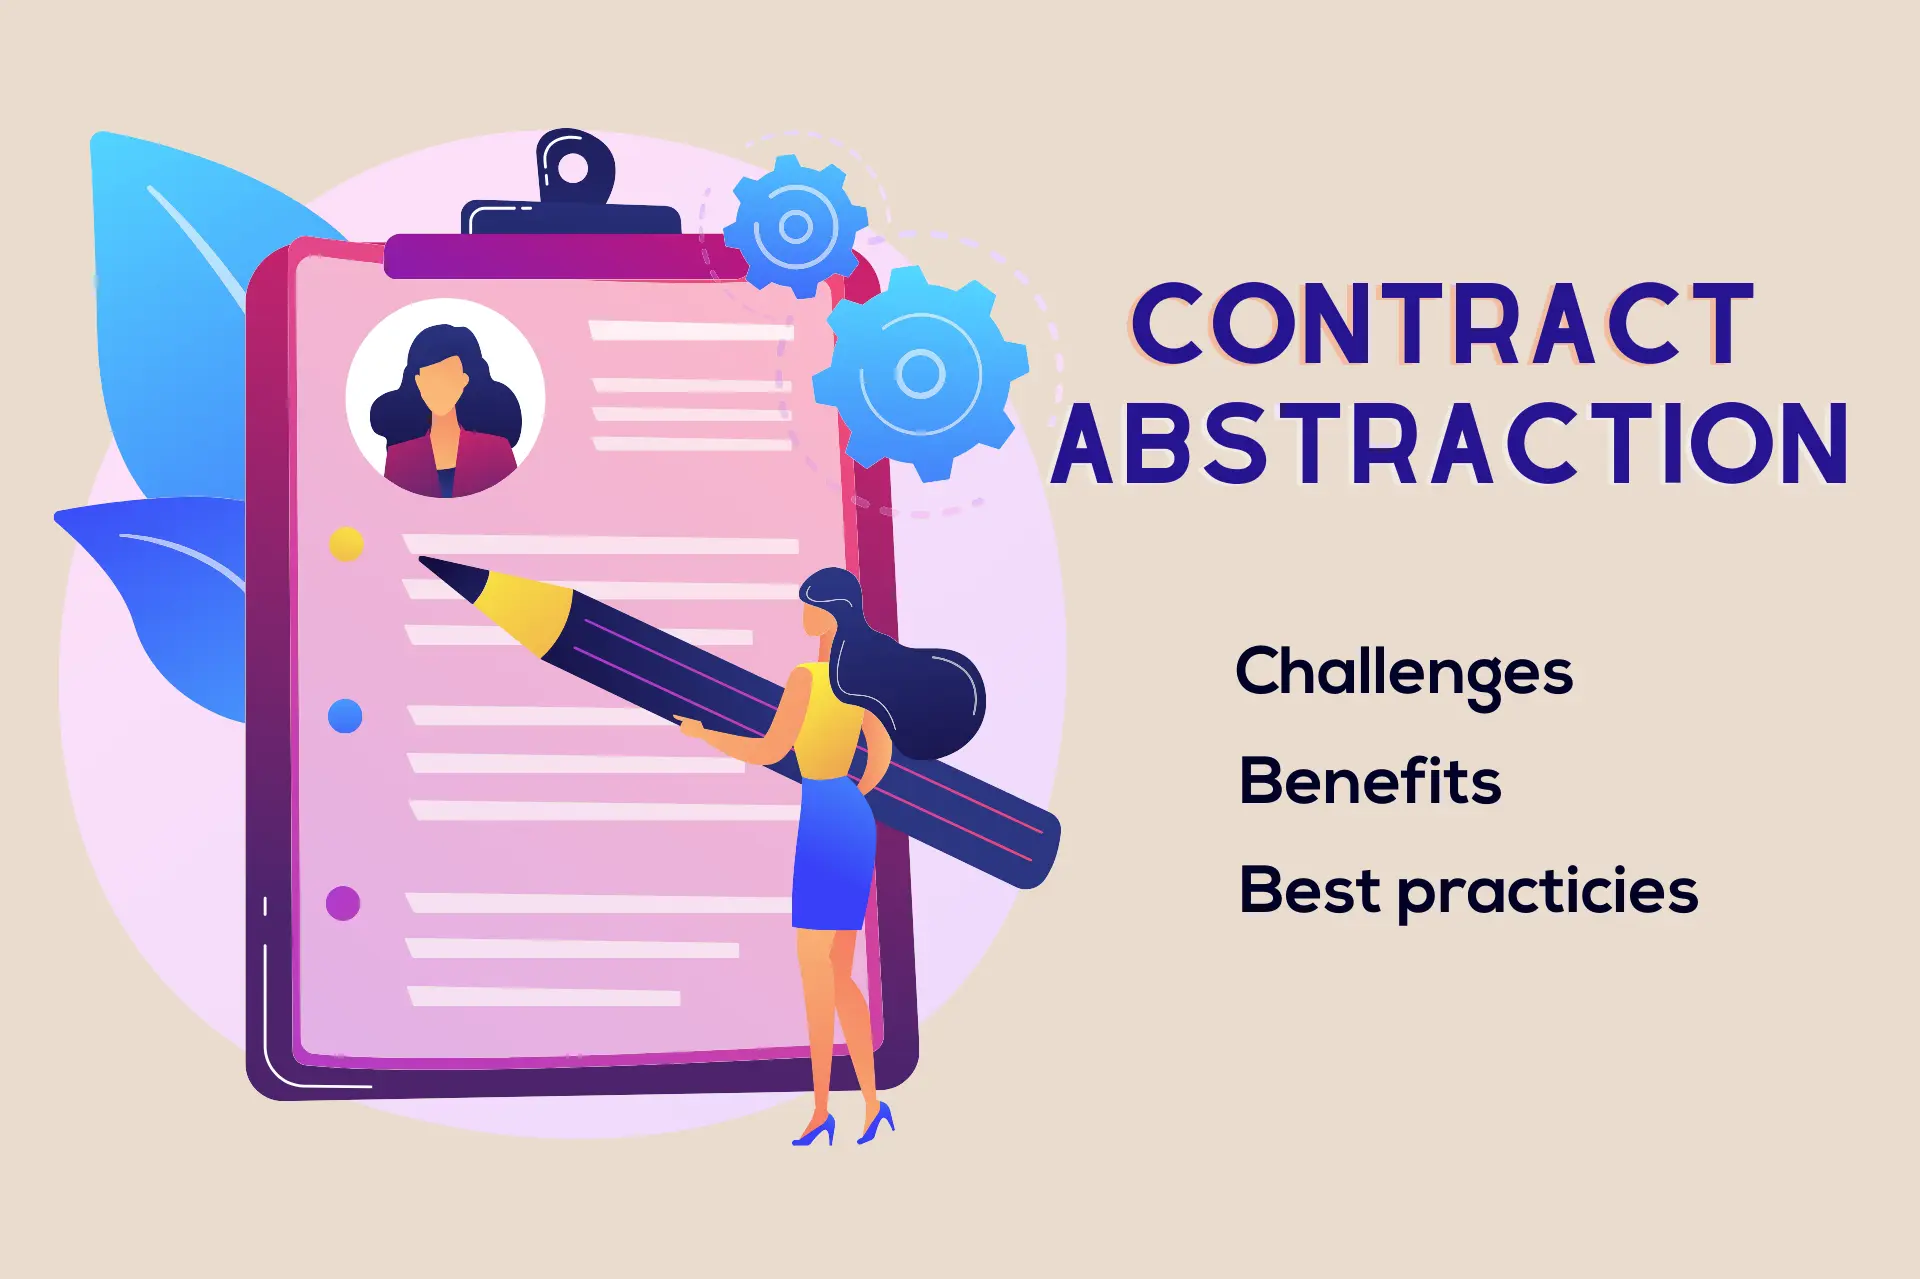 Contract abstraction